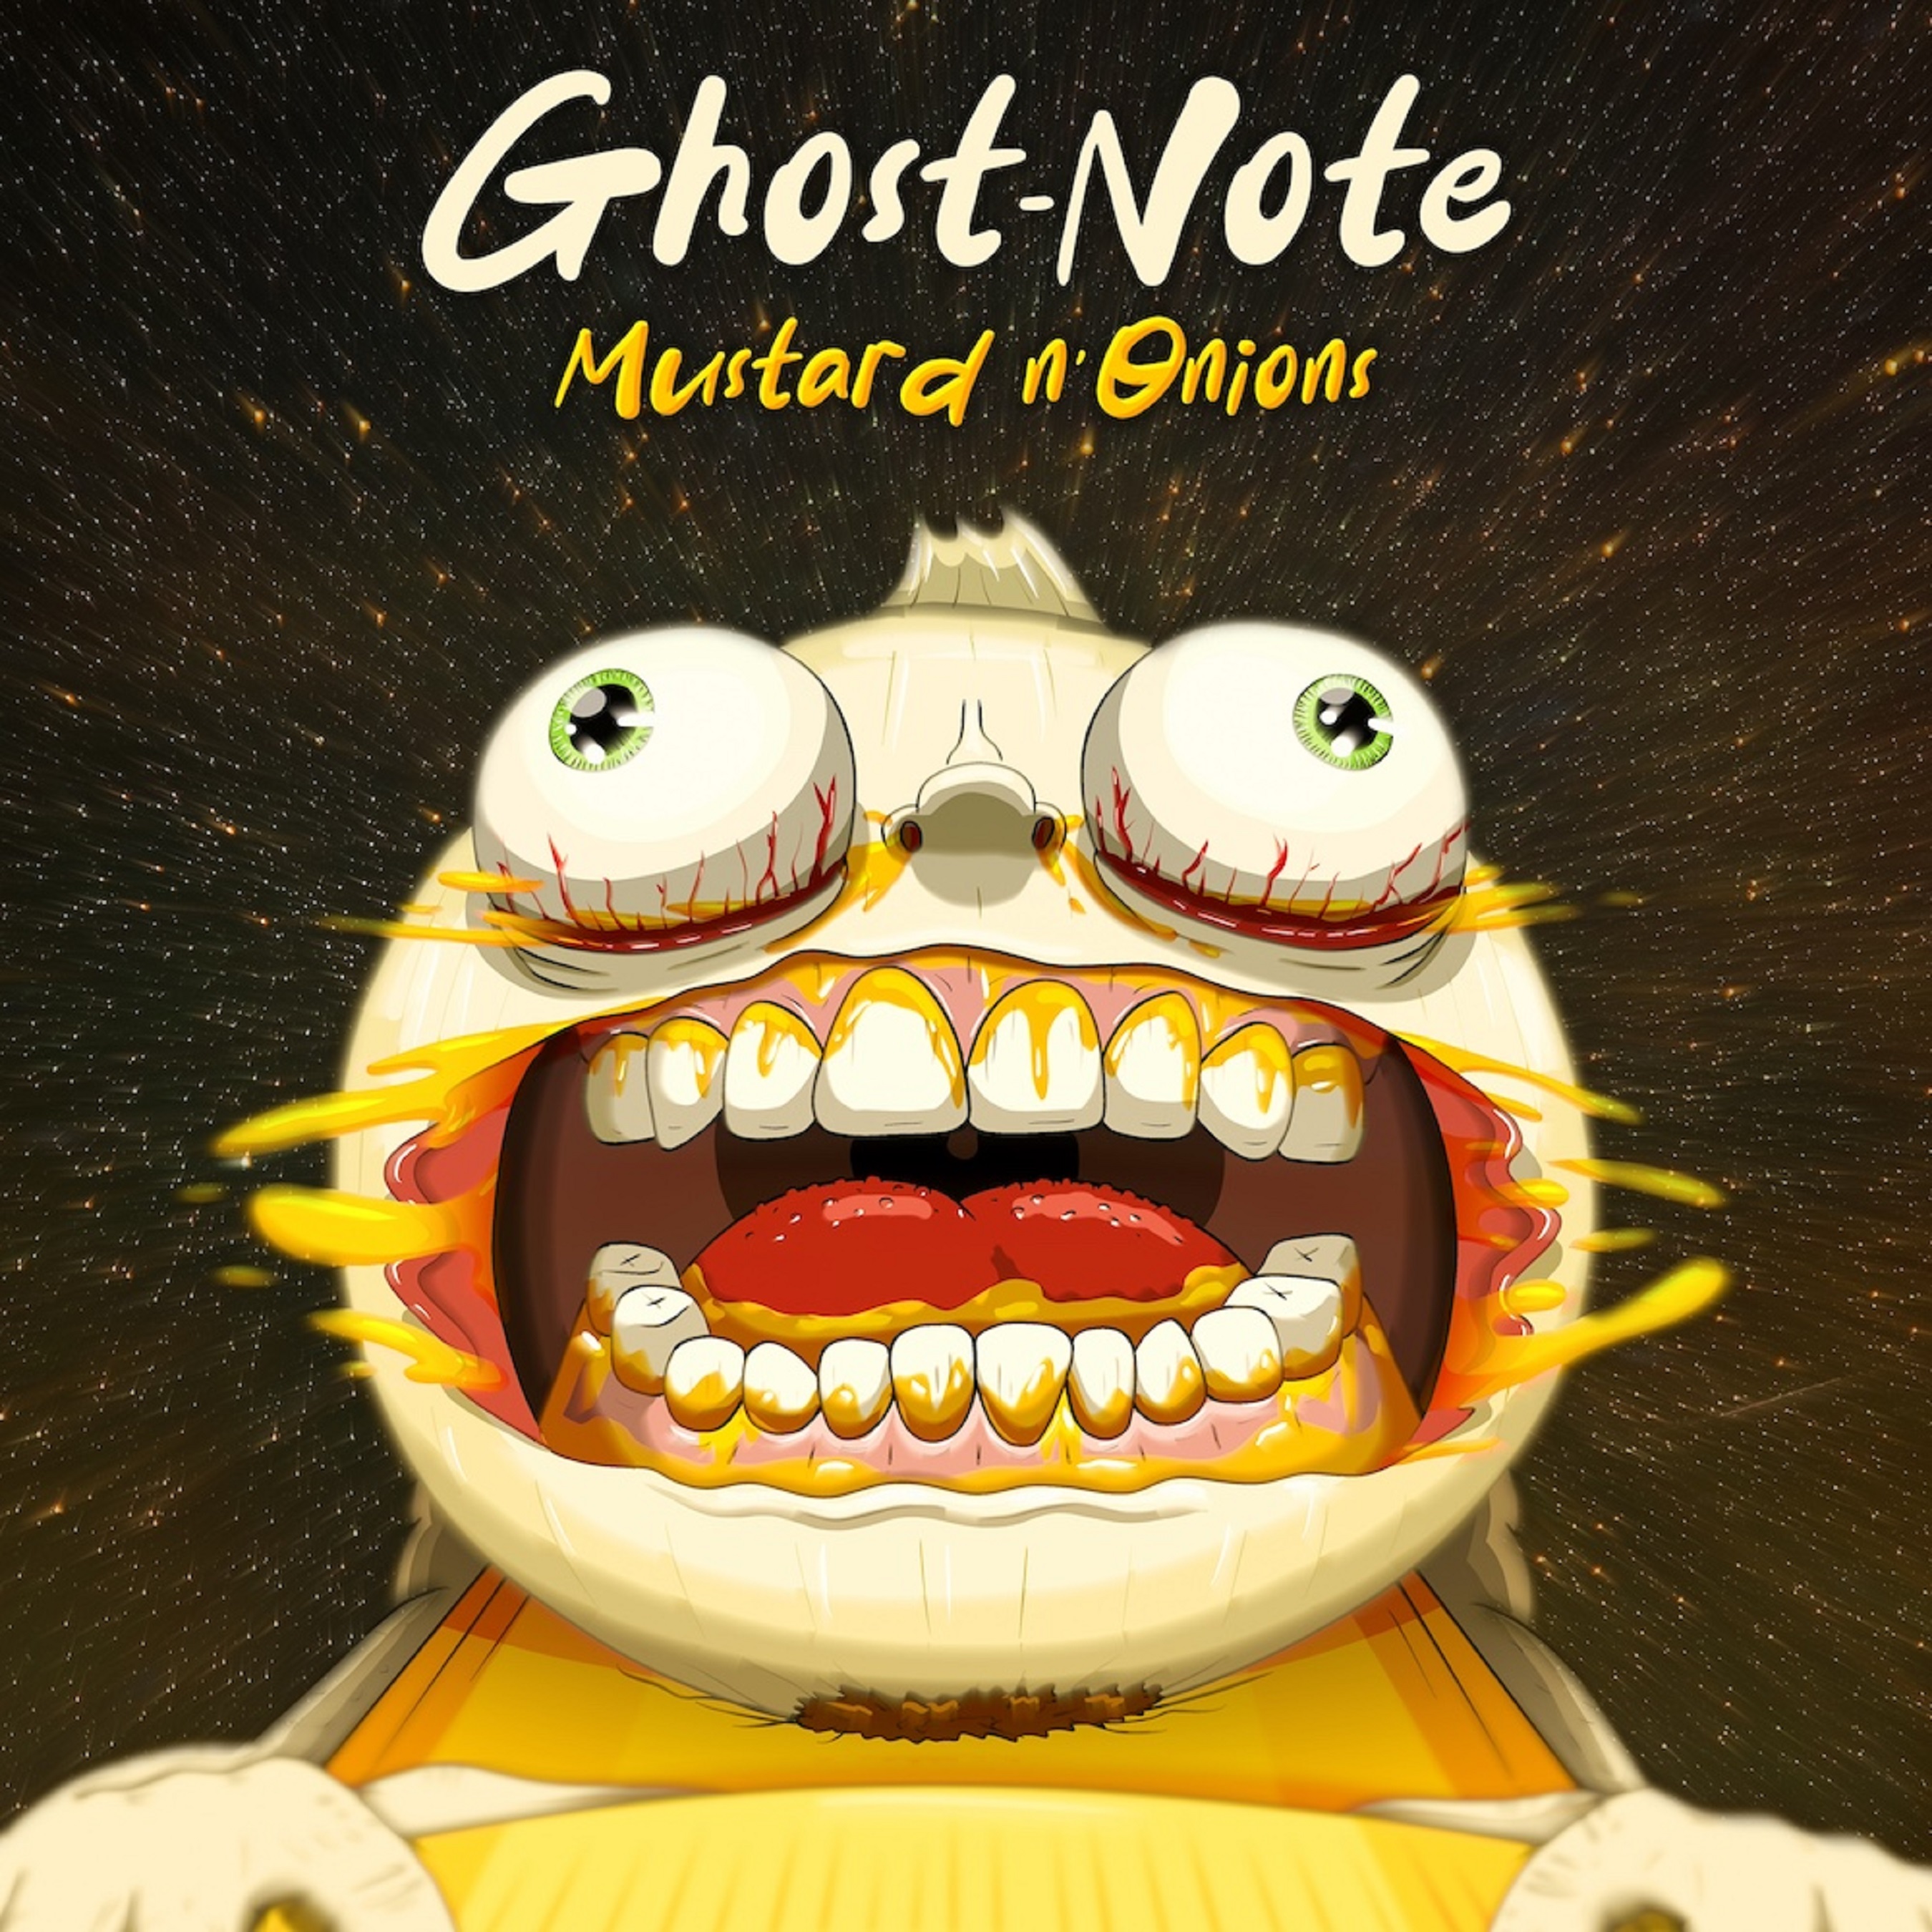 Ghost-Note Announces New Album Mustard n’Onions out April 19th